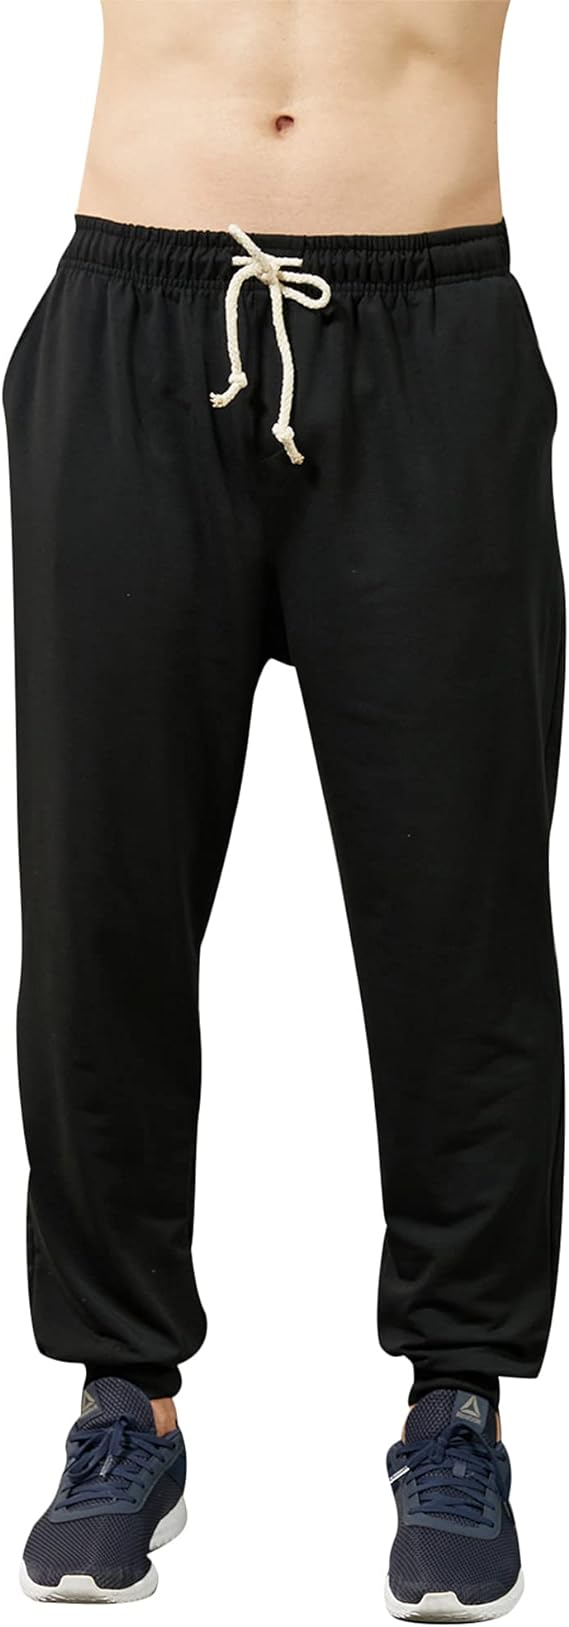 Mens Solid Color Casual Athletic Sweatpants